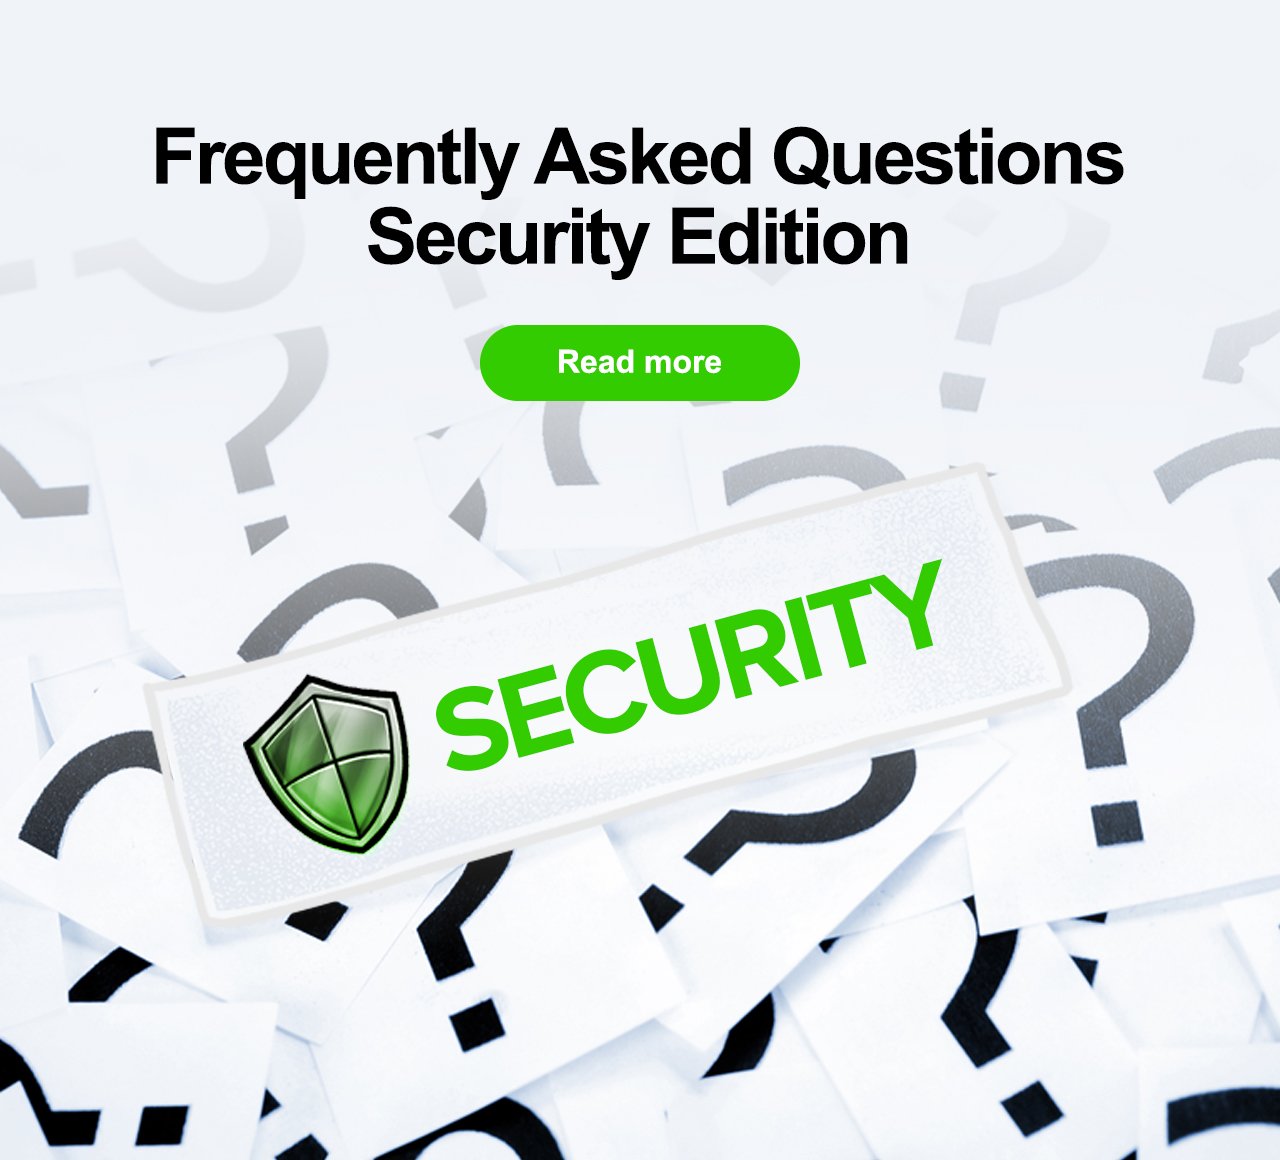 Frequently Asked Questions - Security Edition